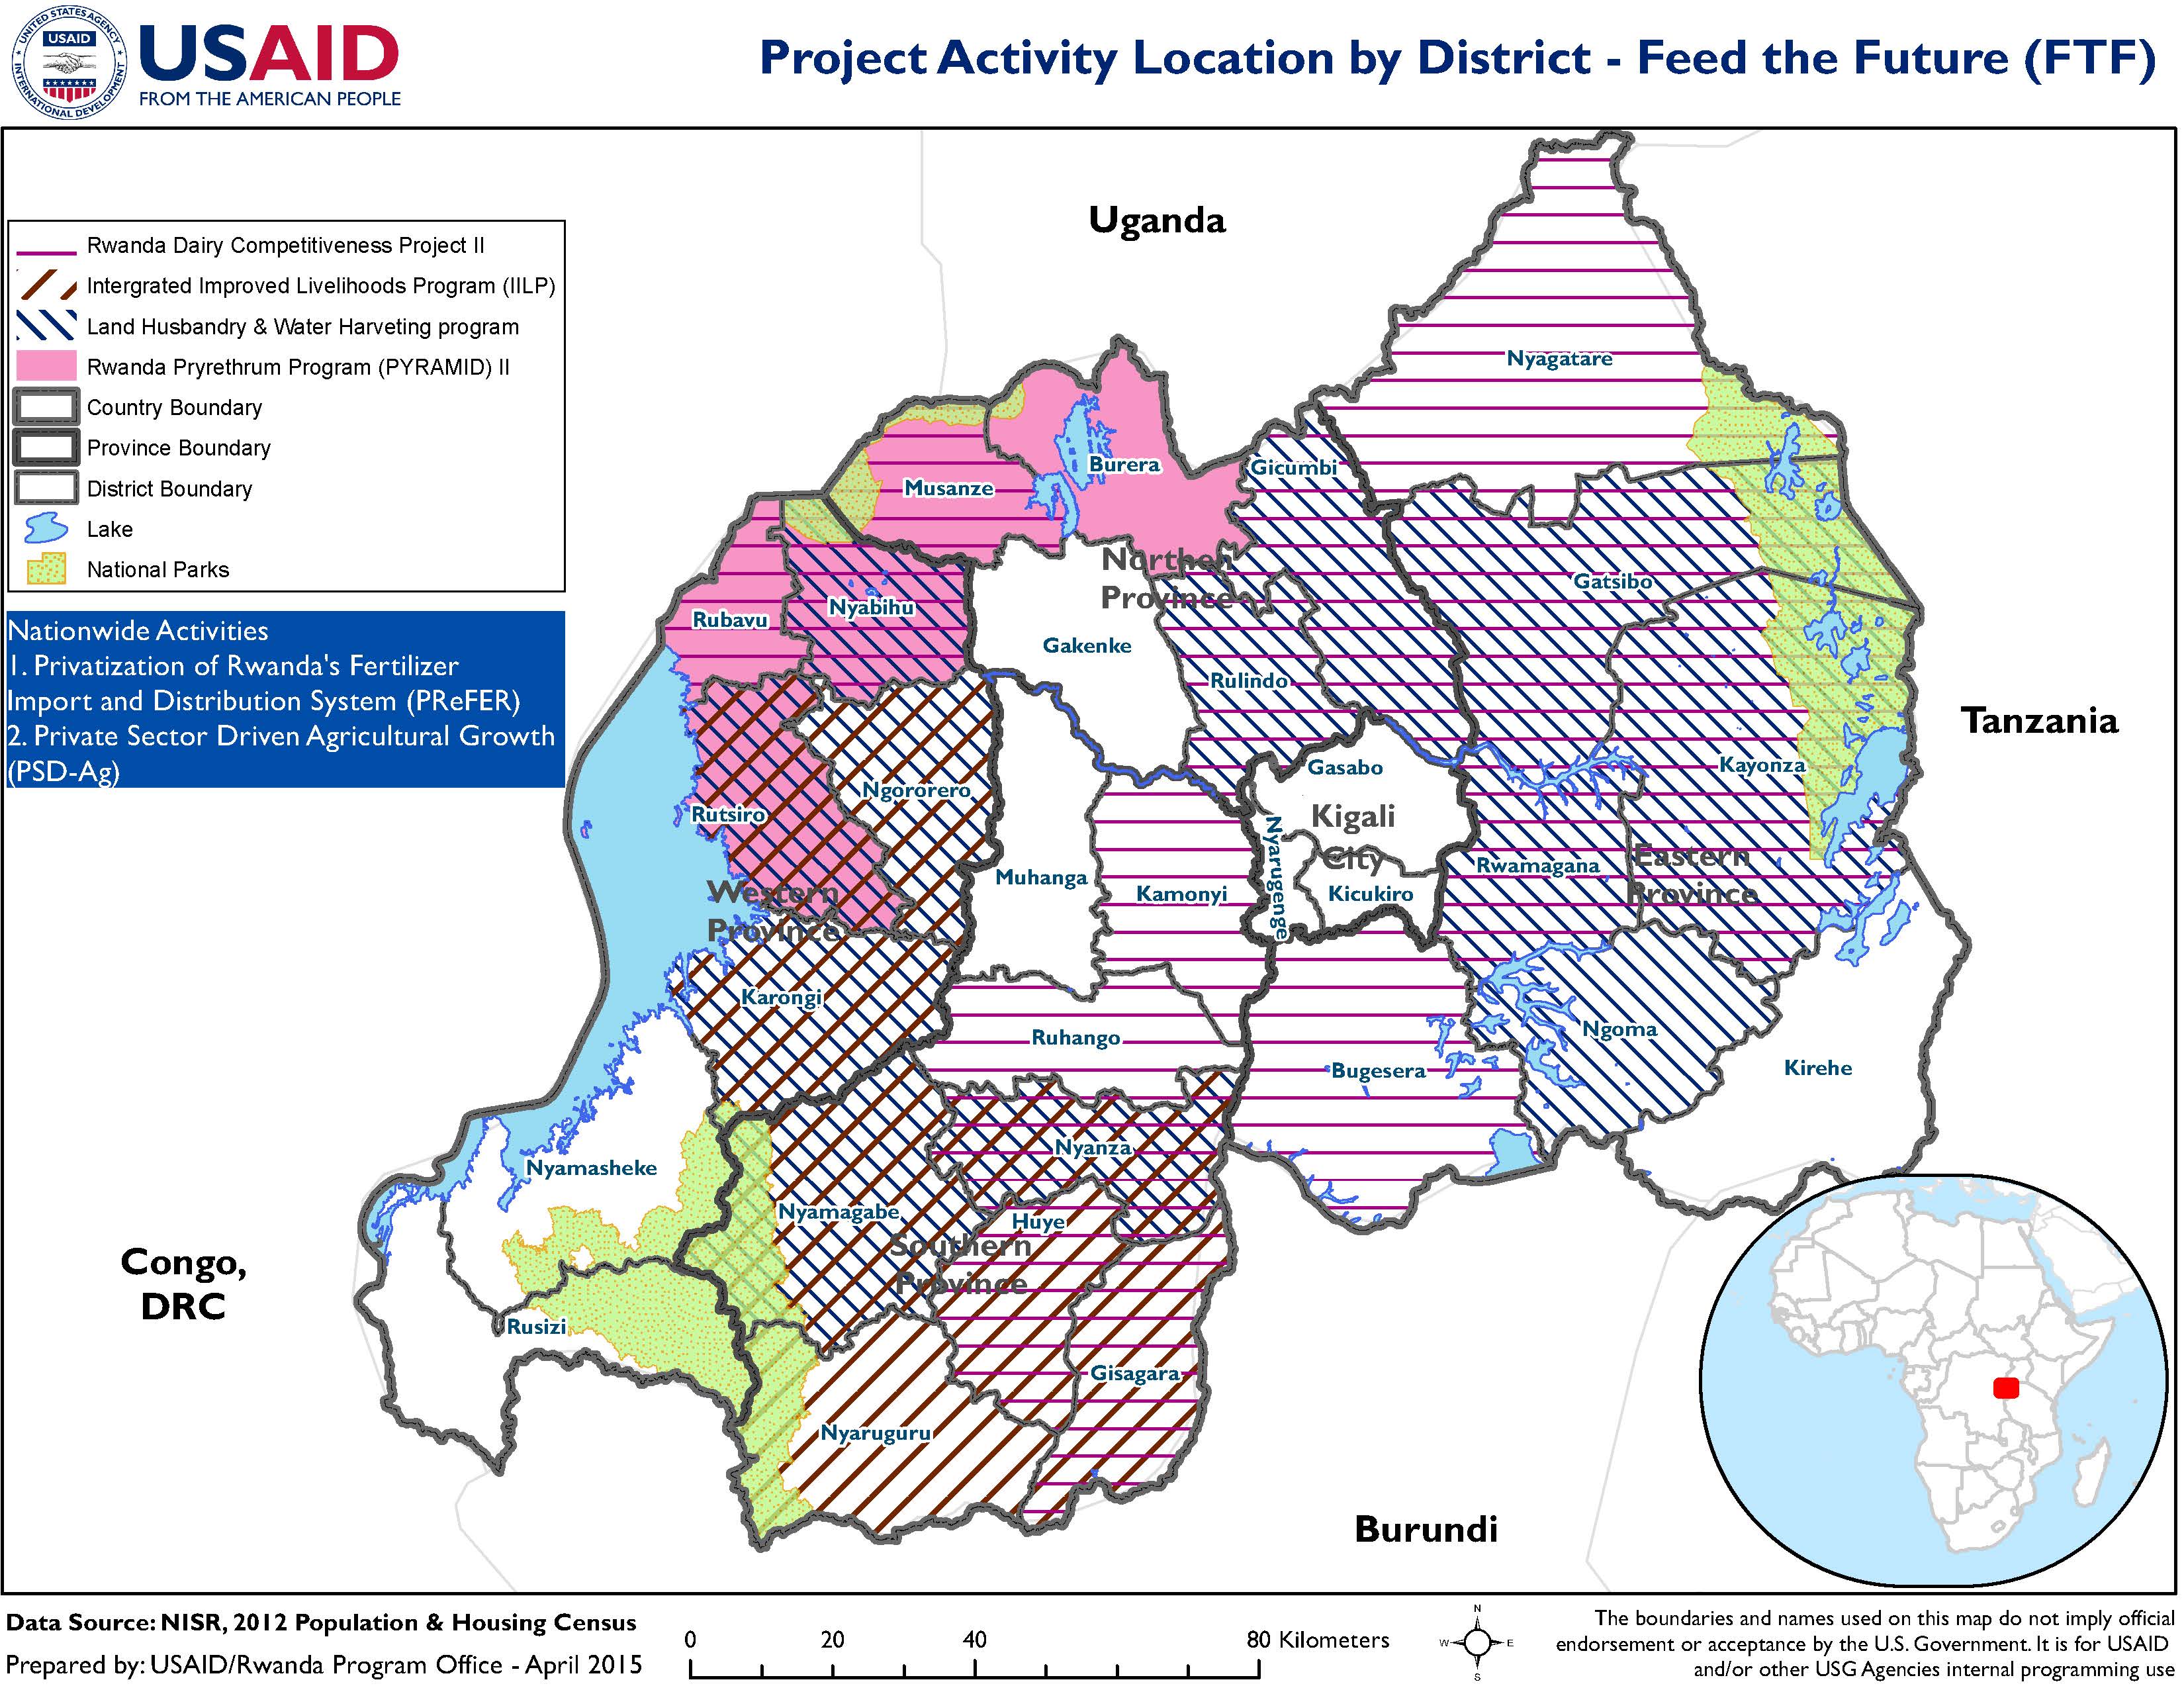 FY 2014 USAID/Rwanda's Feed the Future Program Locations by District